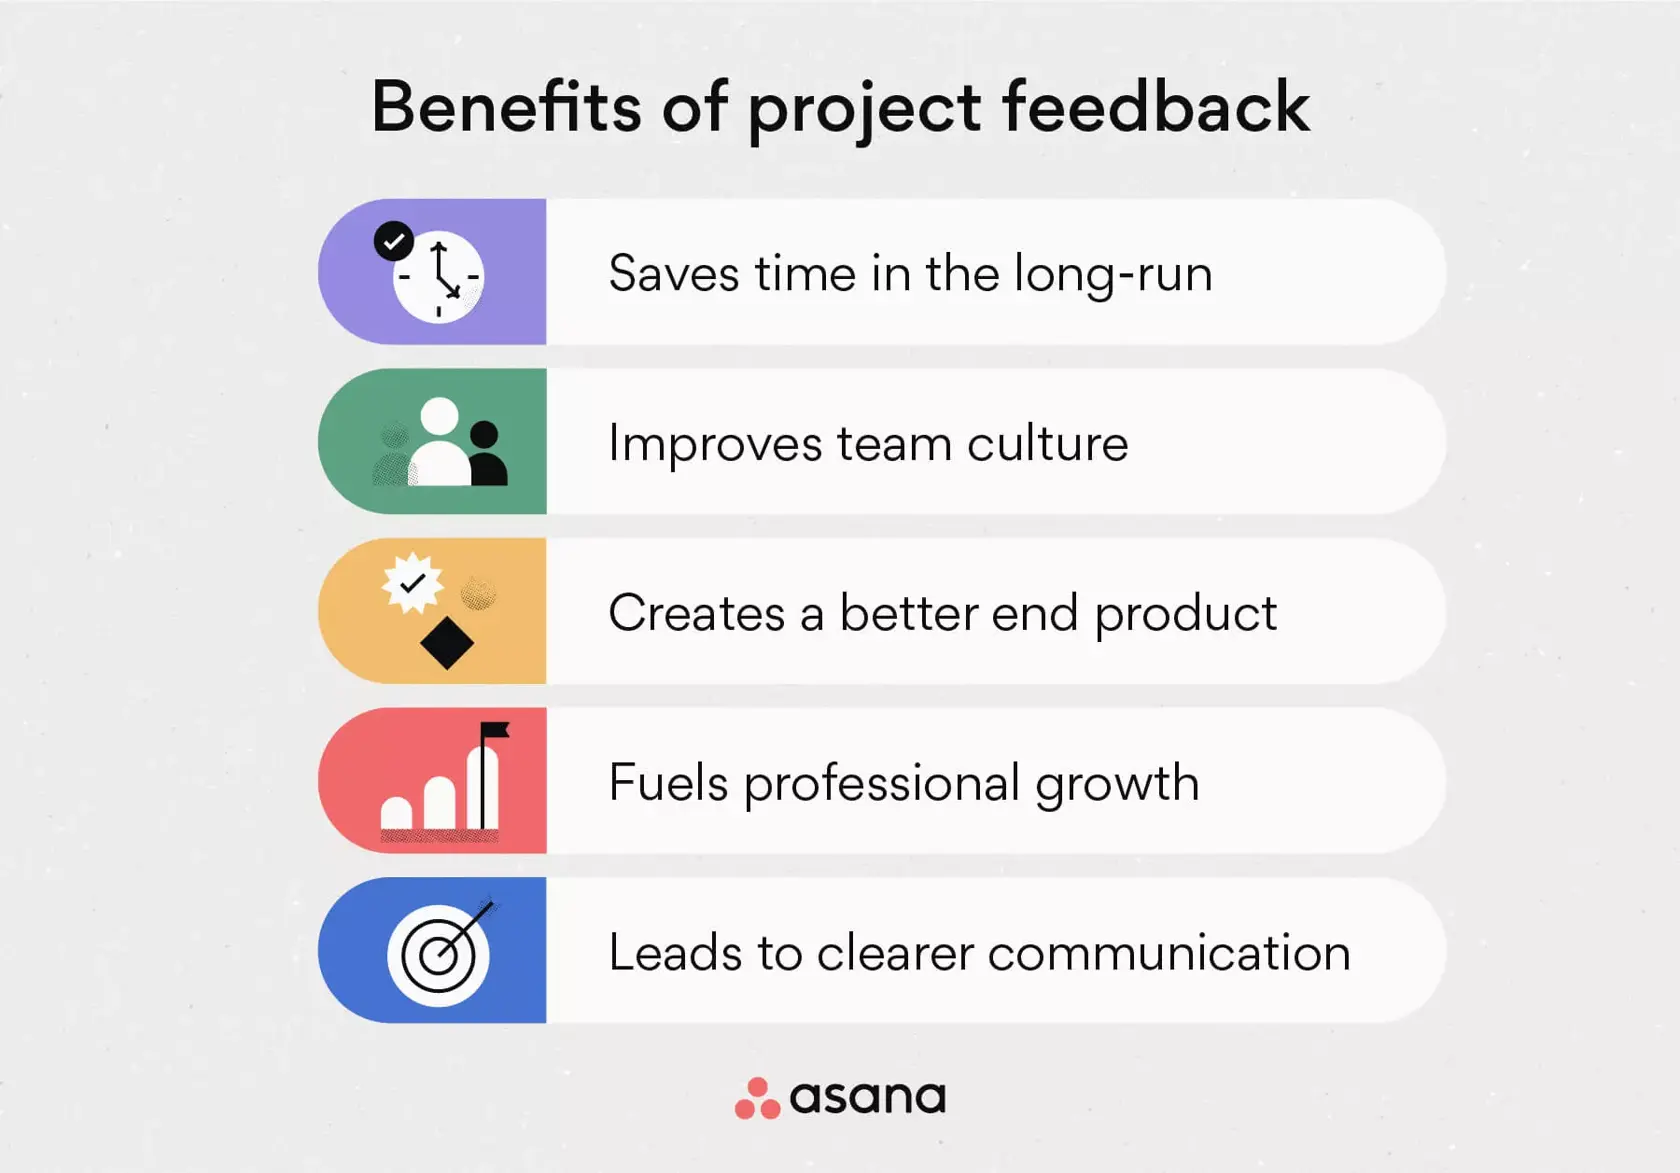 [inline illustration] Benefits of project feedback (infographic)